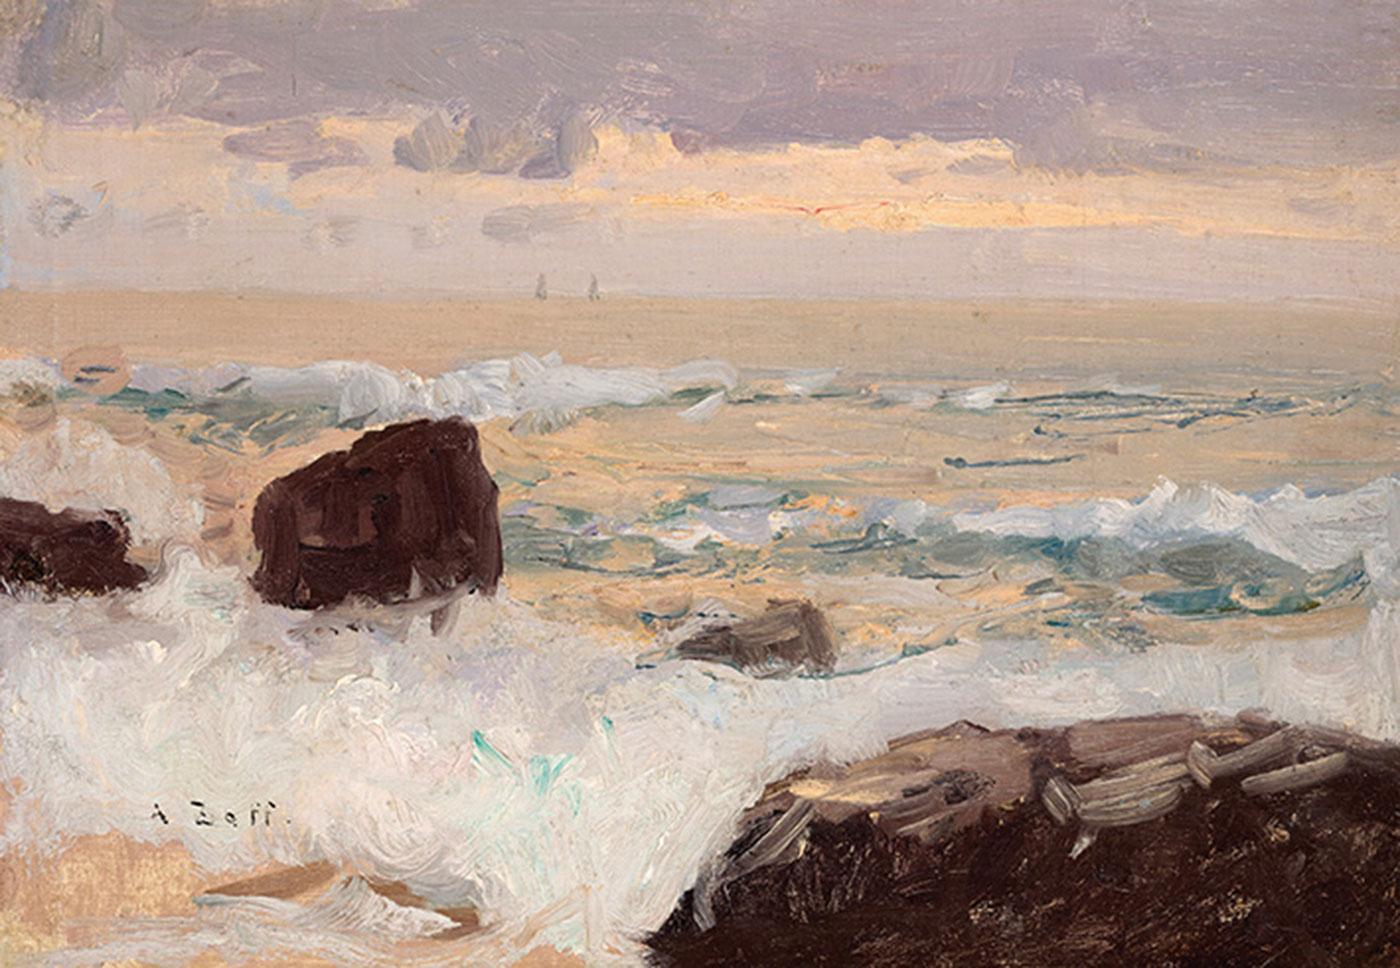 ALFRED ZOFF Exhibition in Vienna – The Fascination of the Sea